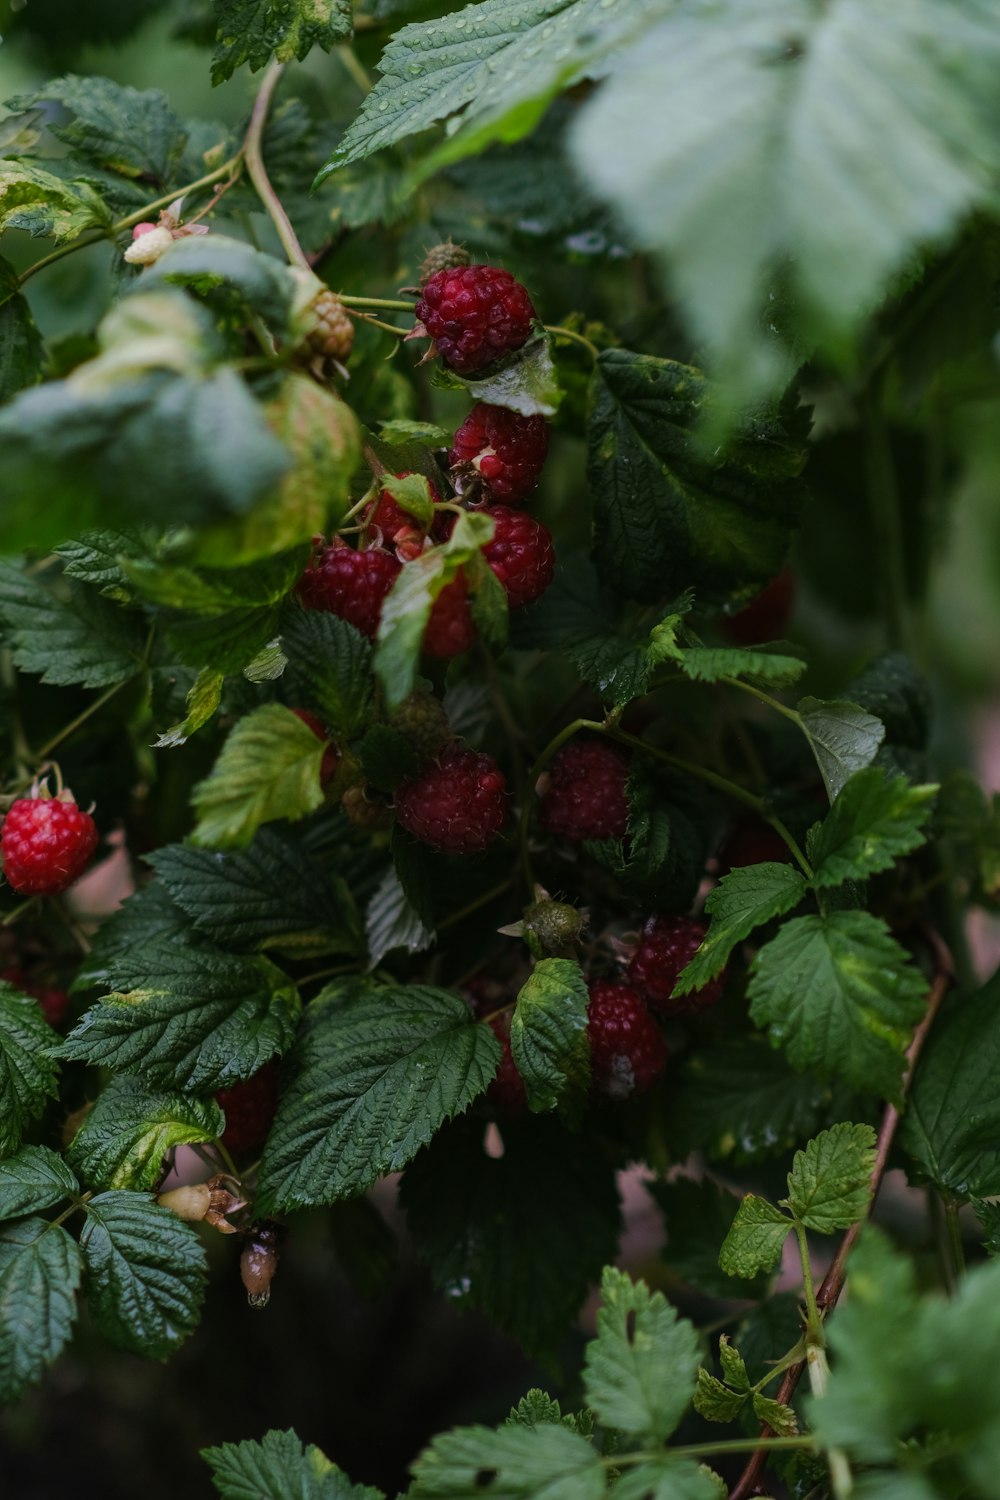 raspberries growing on a bush with green leaves